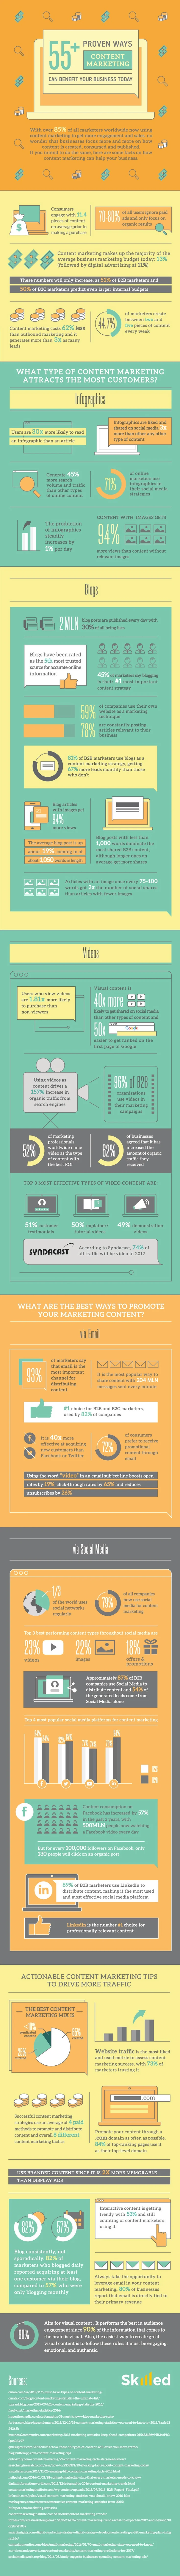 55+ Proven Ways Content Marketing Can Help Your Business (infographic)